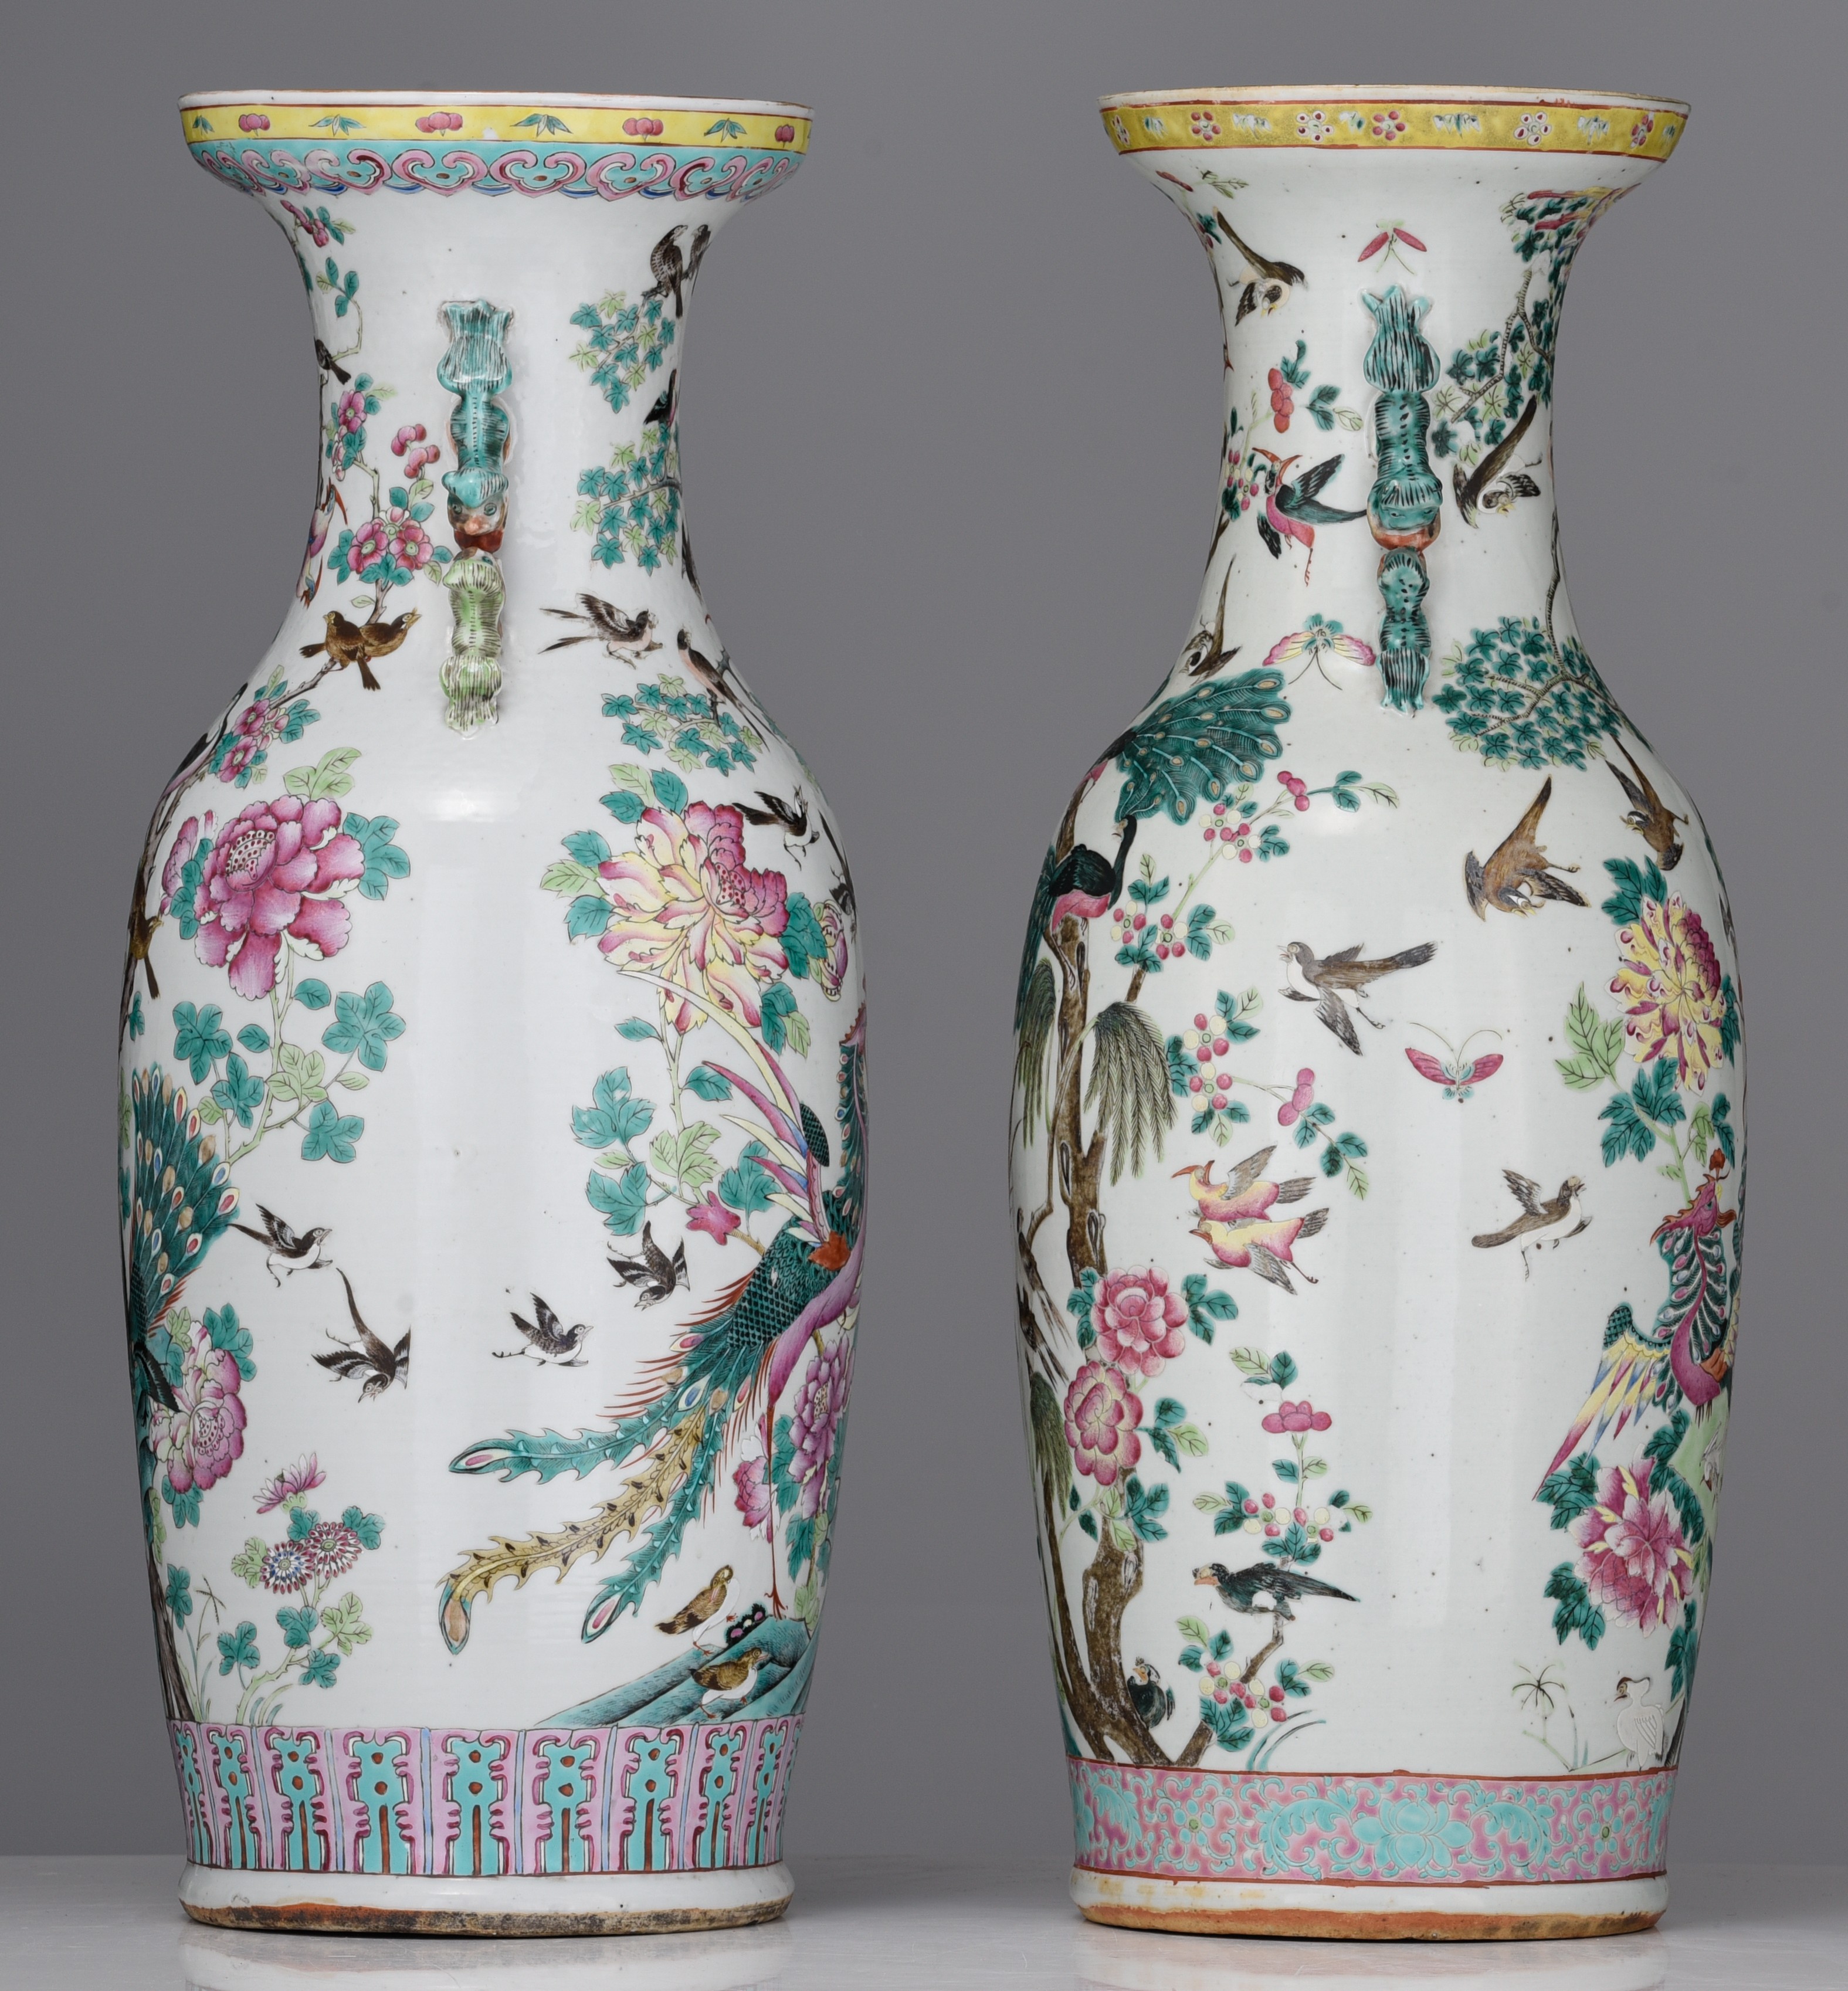 A similar pair of Chinese famille rose 'One Hundred Birds' vases, 19thC, H 62 cm - Image 5 of 7